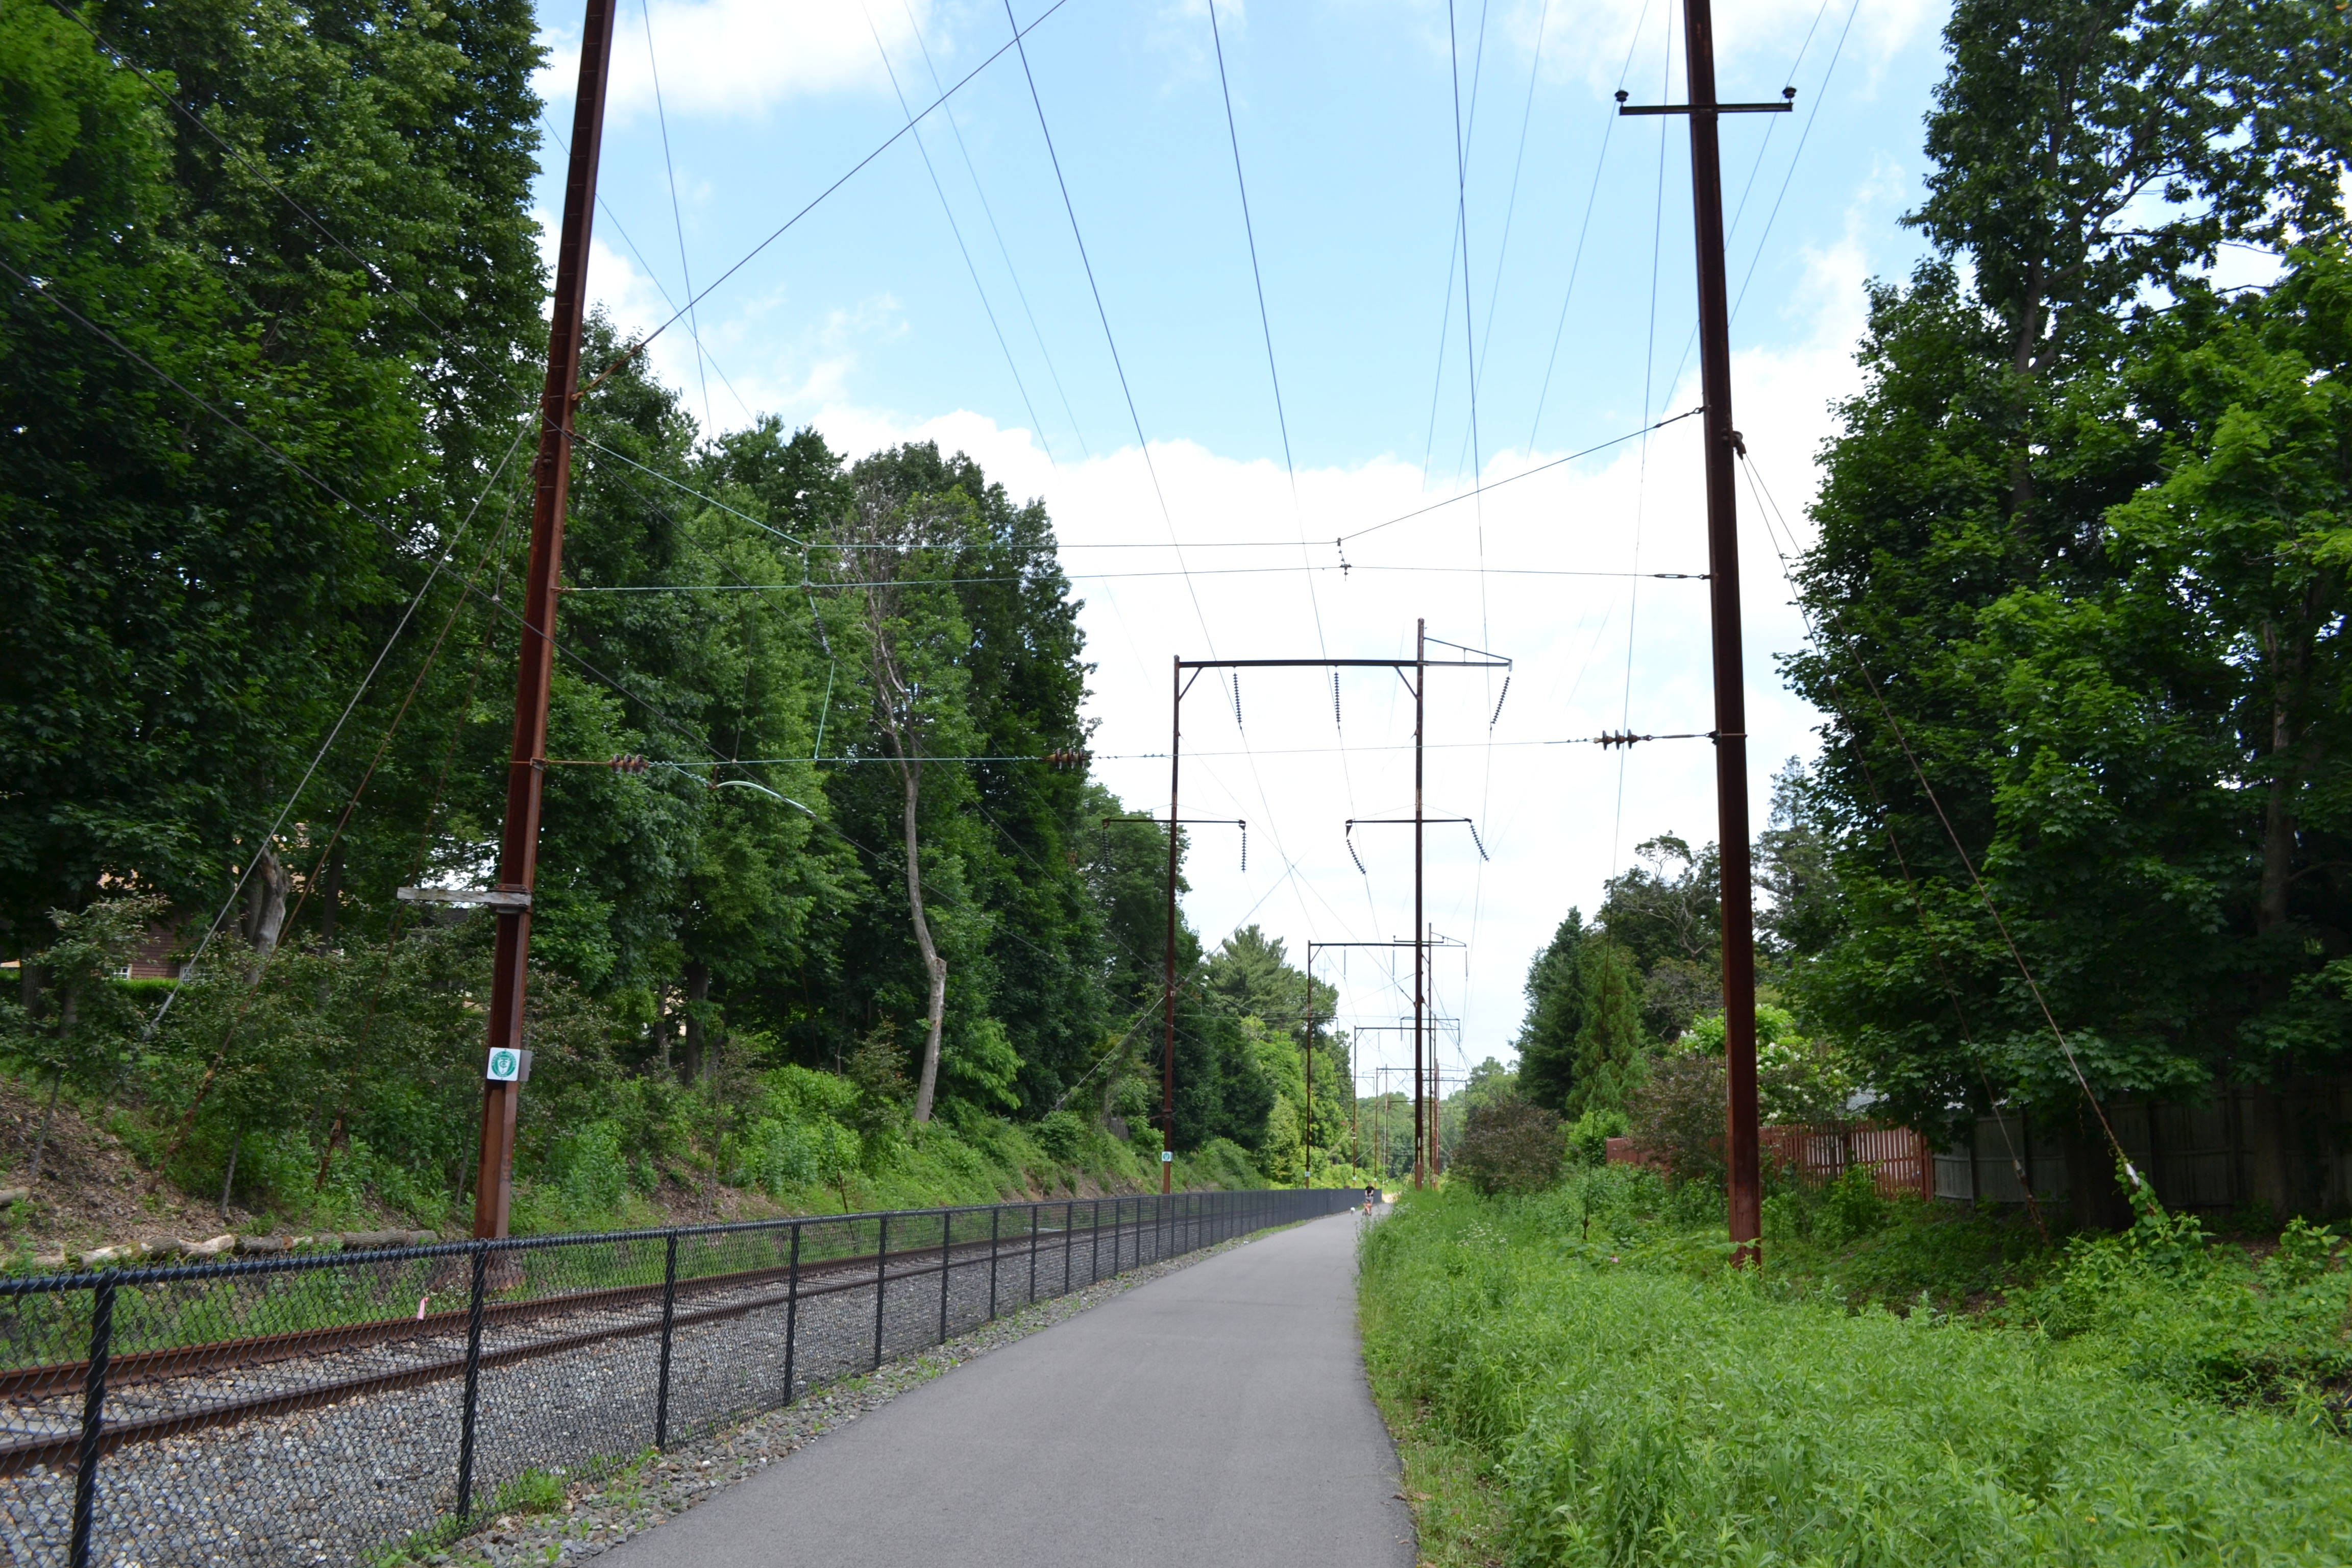 The paved portion of the trail starts alongside an existing segment of tracks